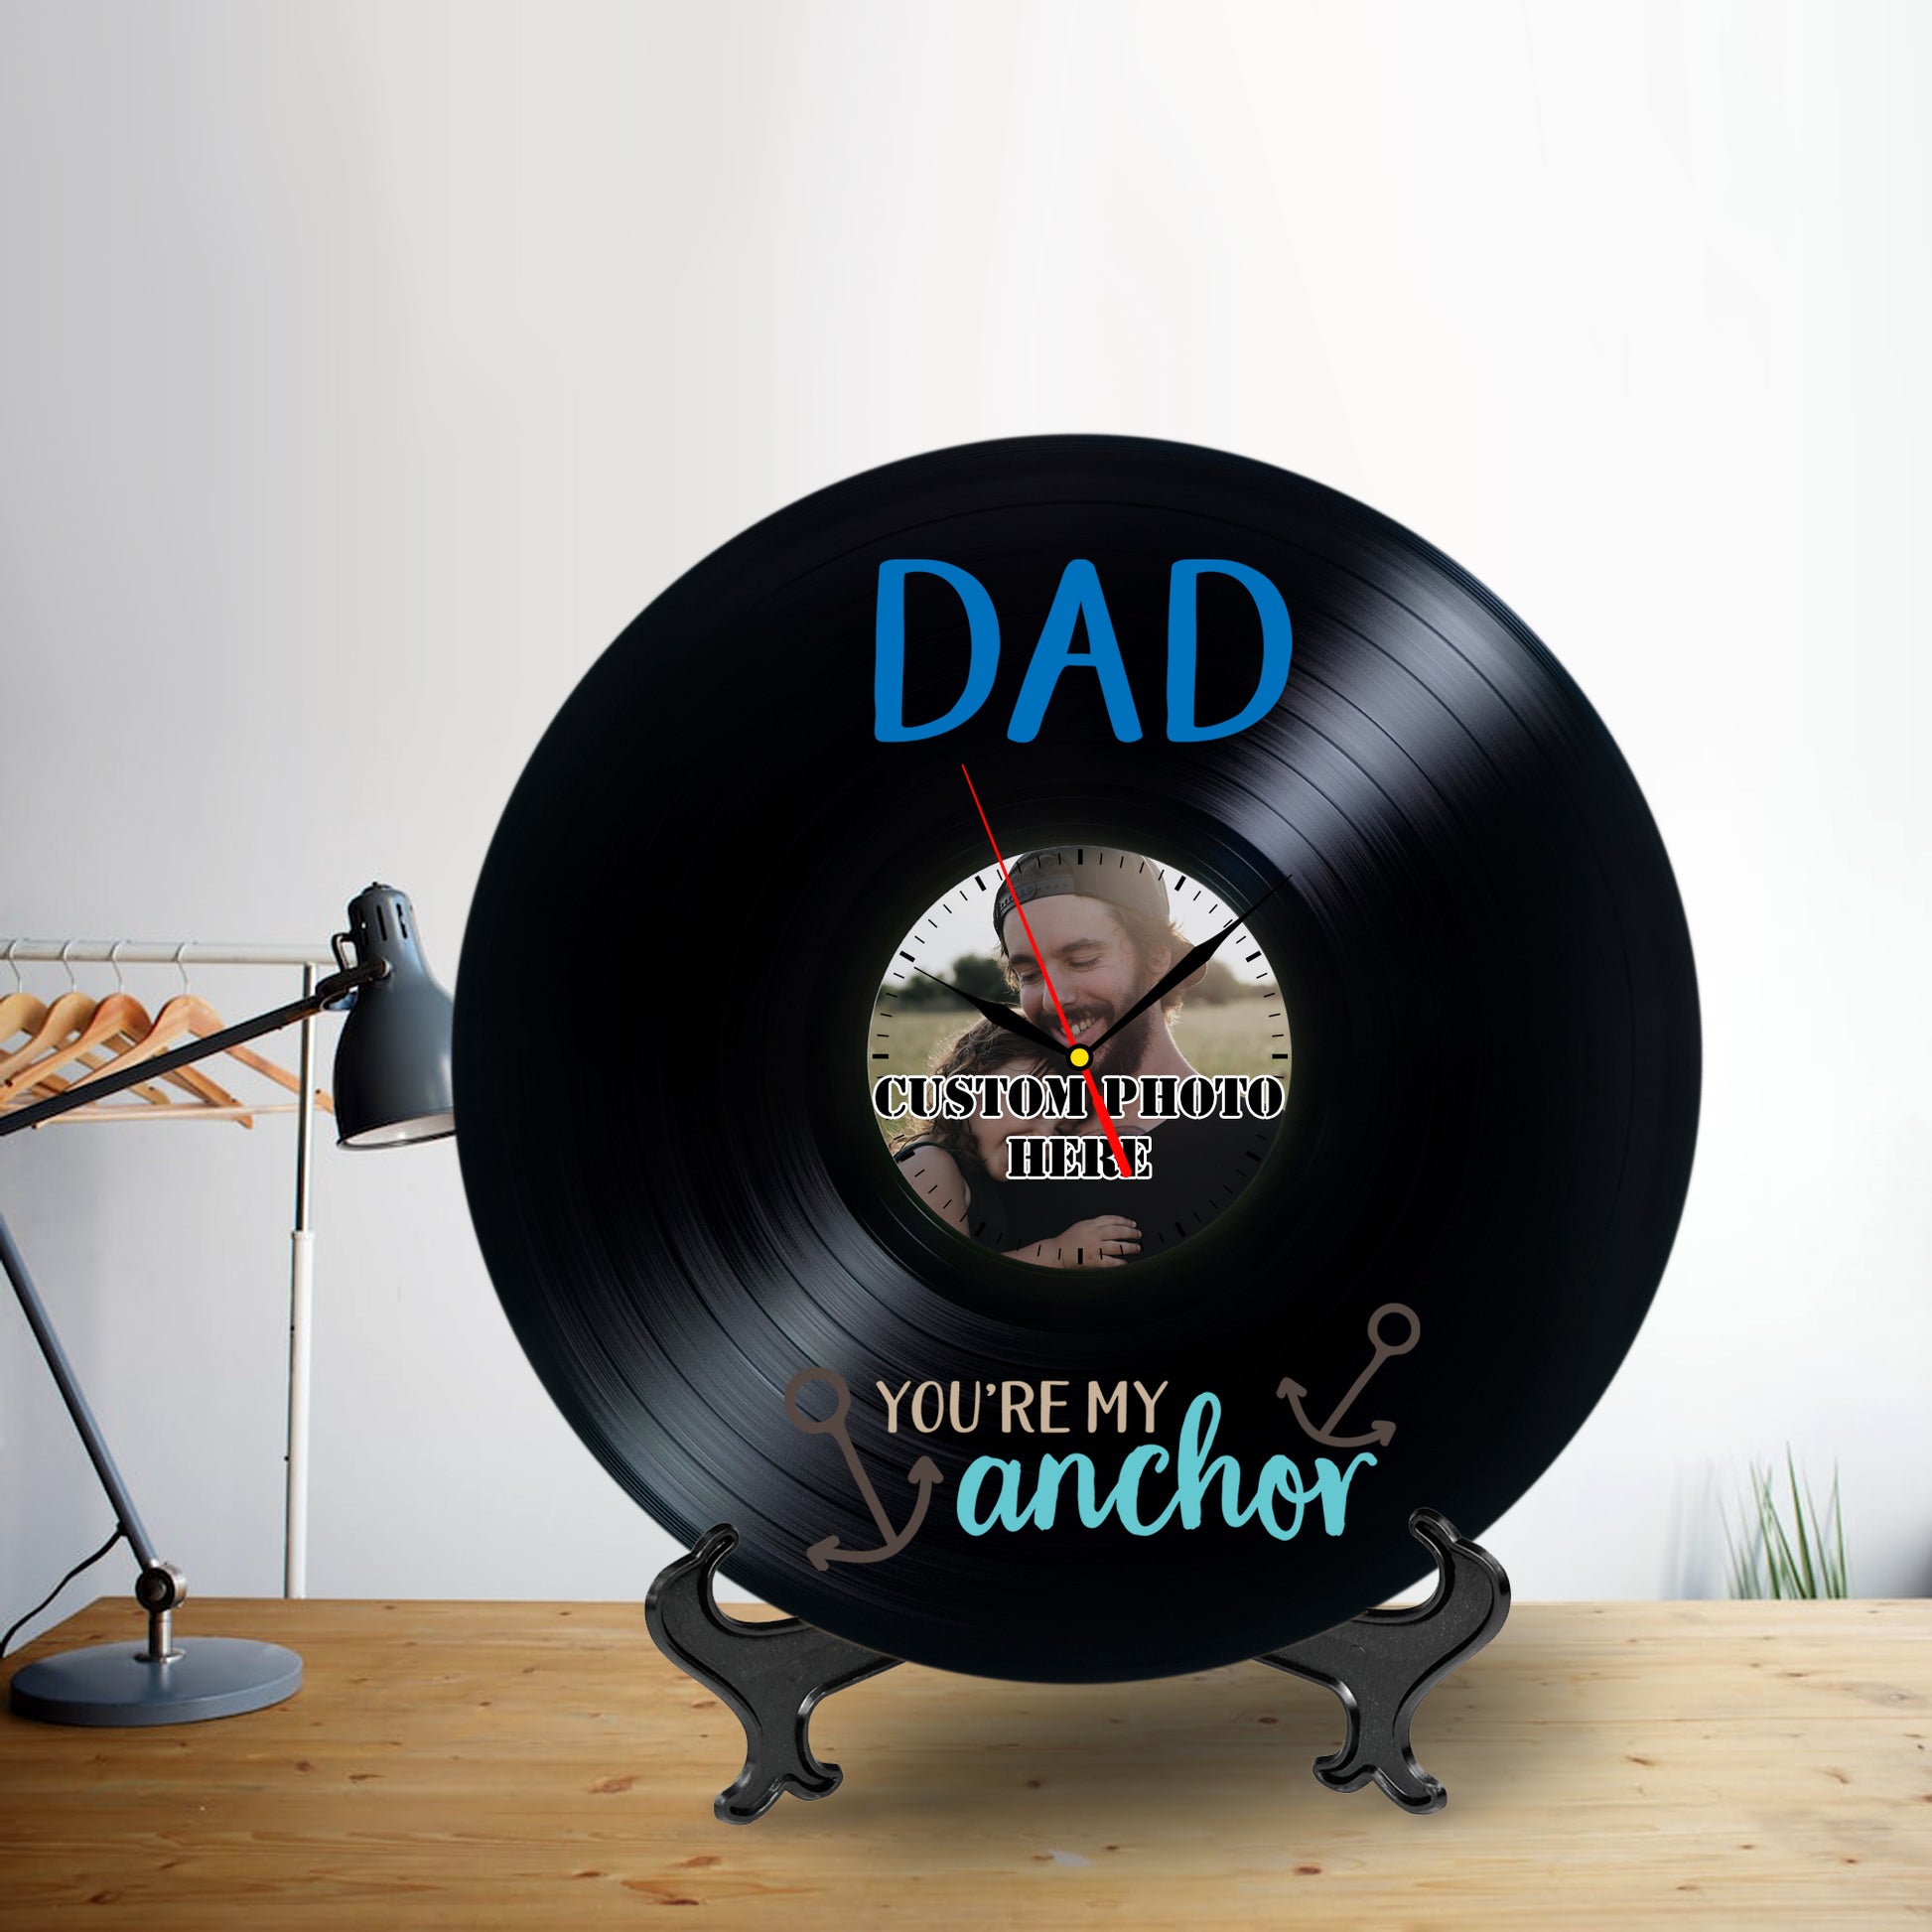 Custom Photo Lp Record Clock Gift for Father